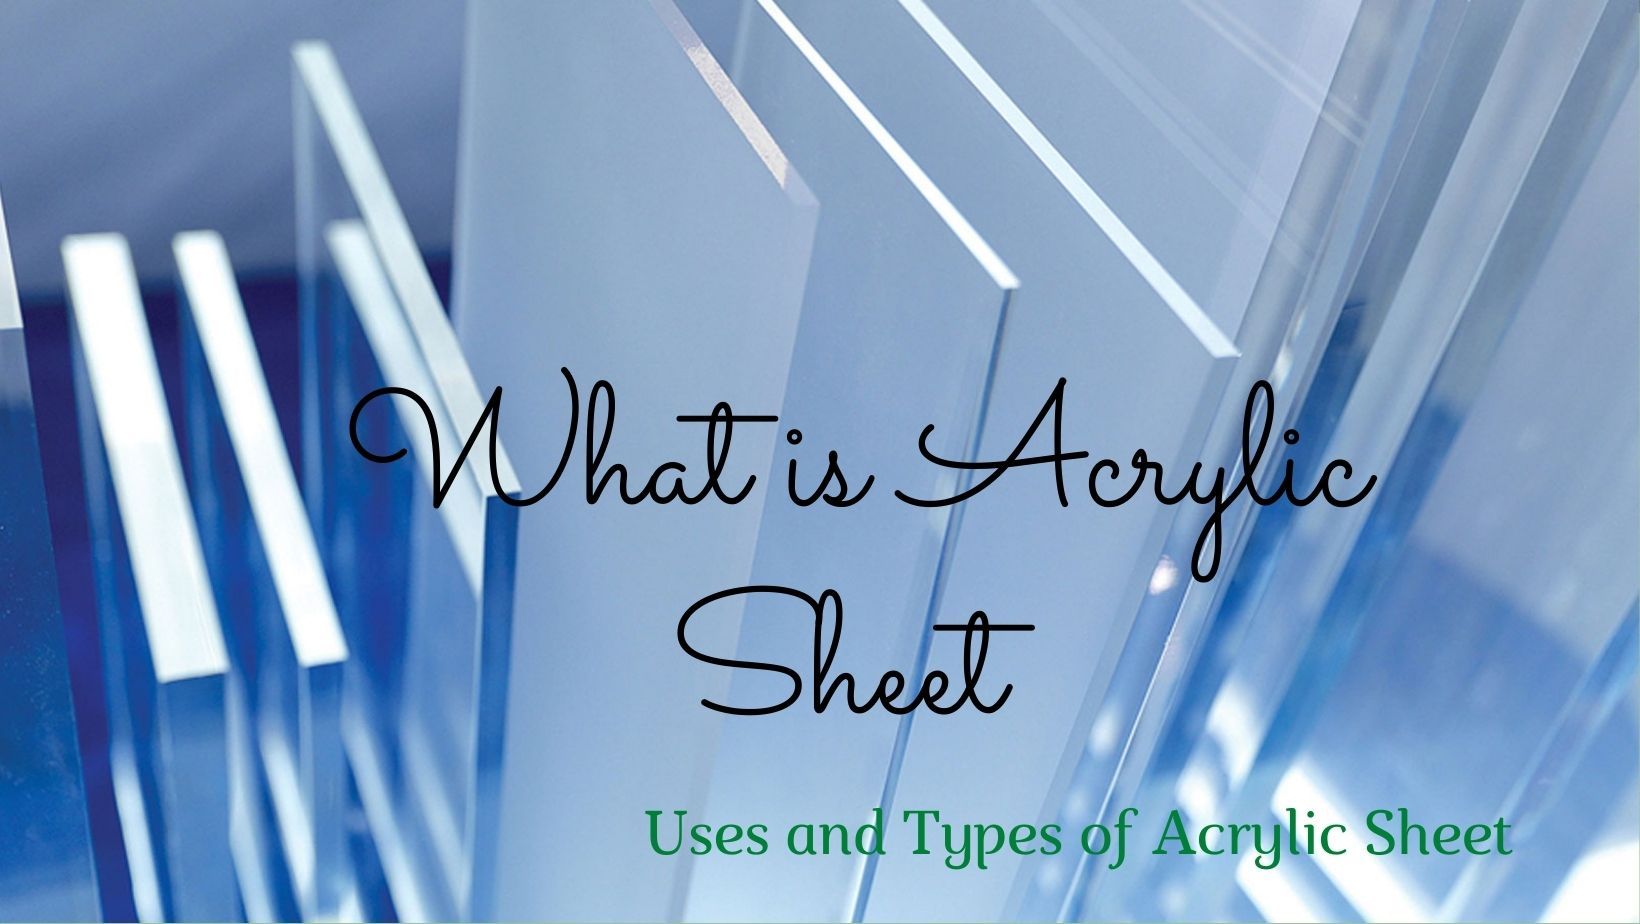 Acrylic Uses for Homes - How to Use Acrylic Panels & Sheets at